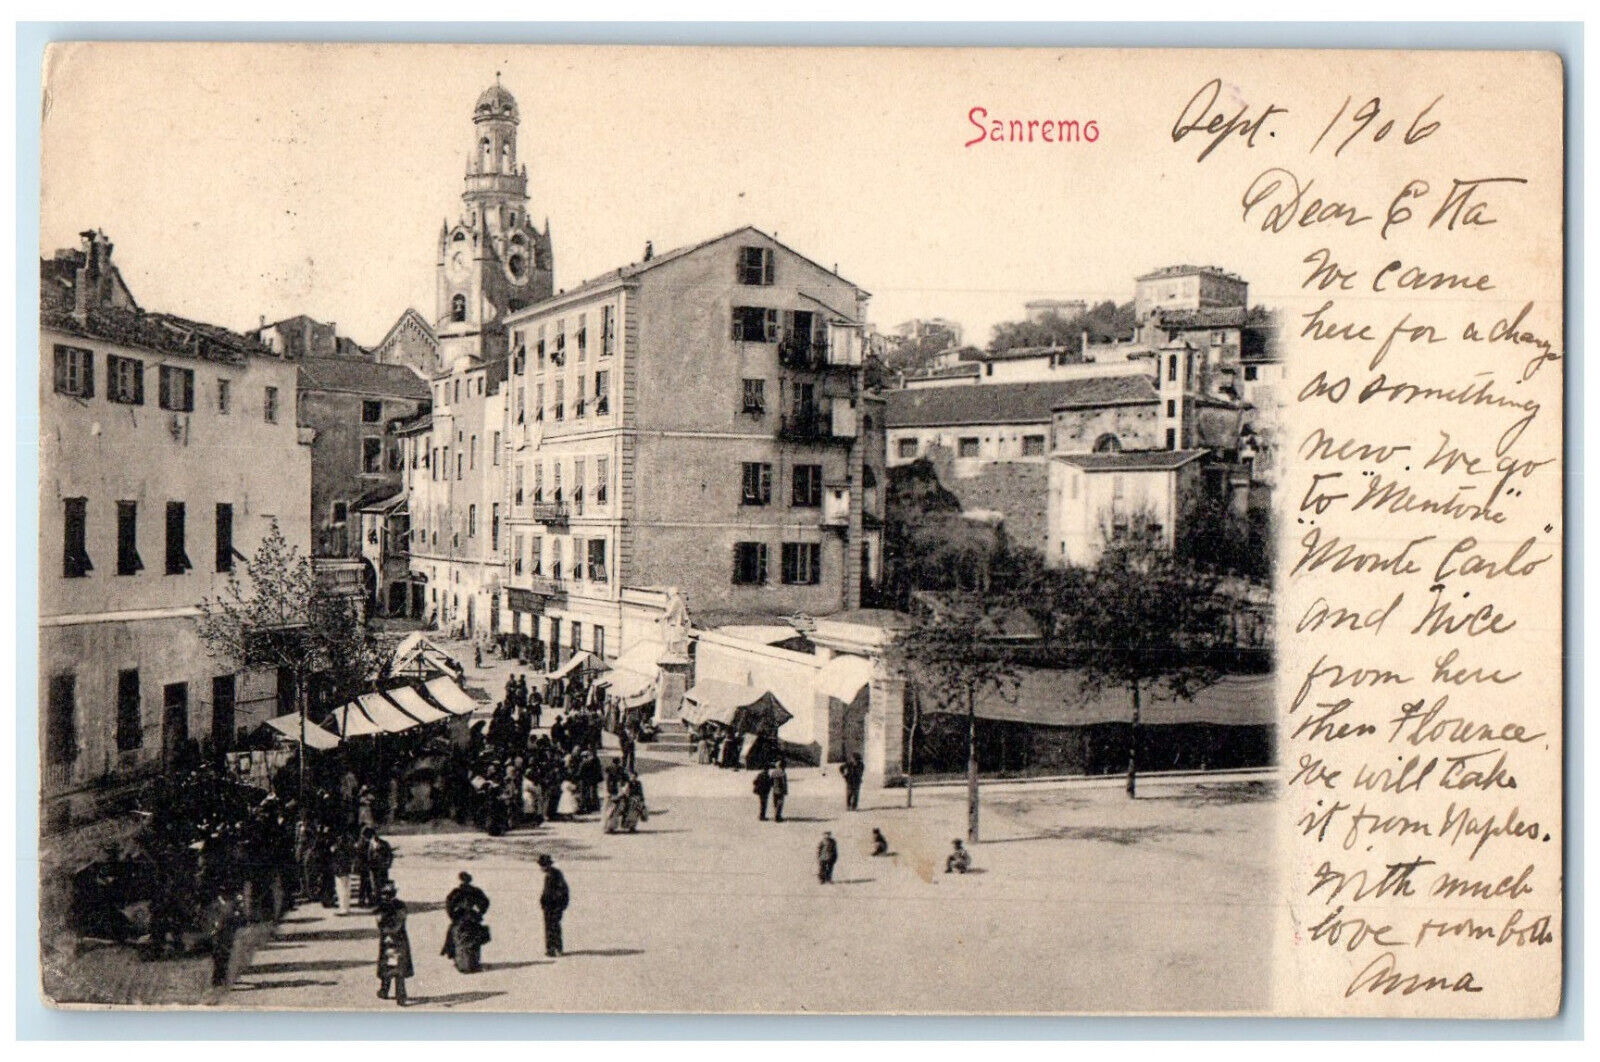 1906 View of Business Section Street at Sanremo Italy Posted Antique Postcard